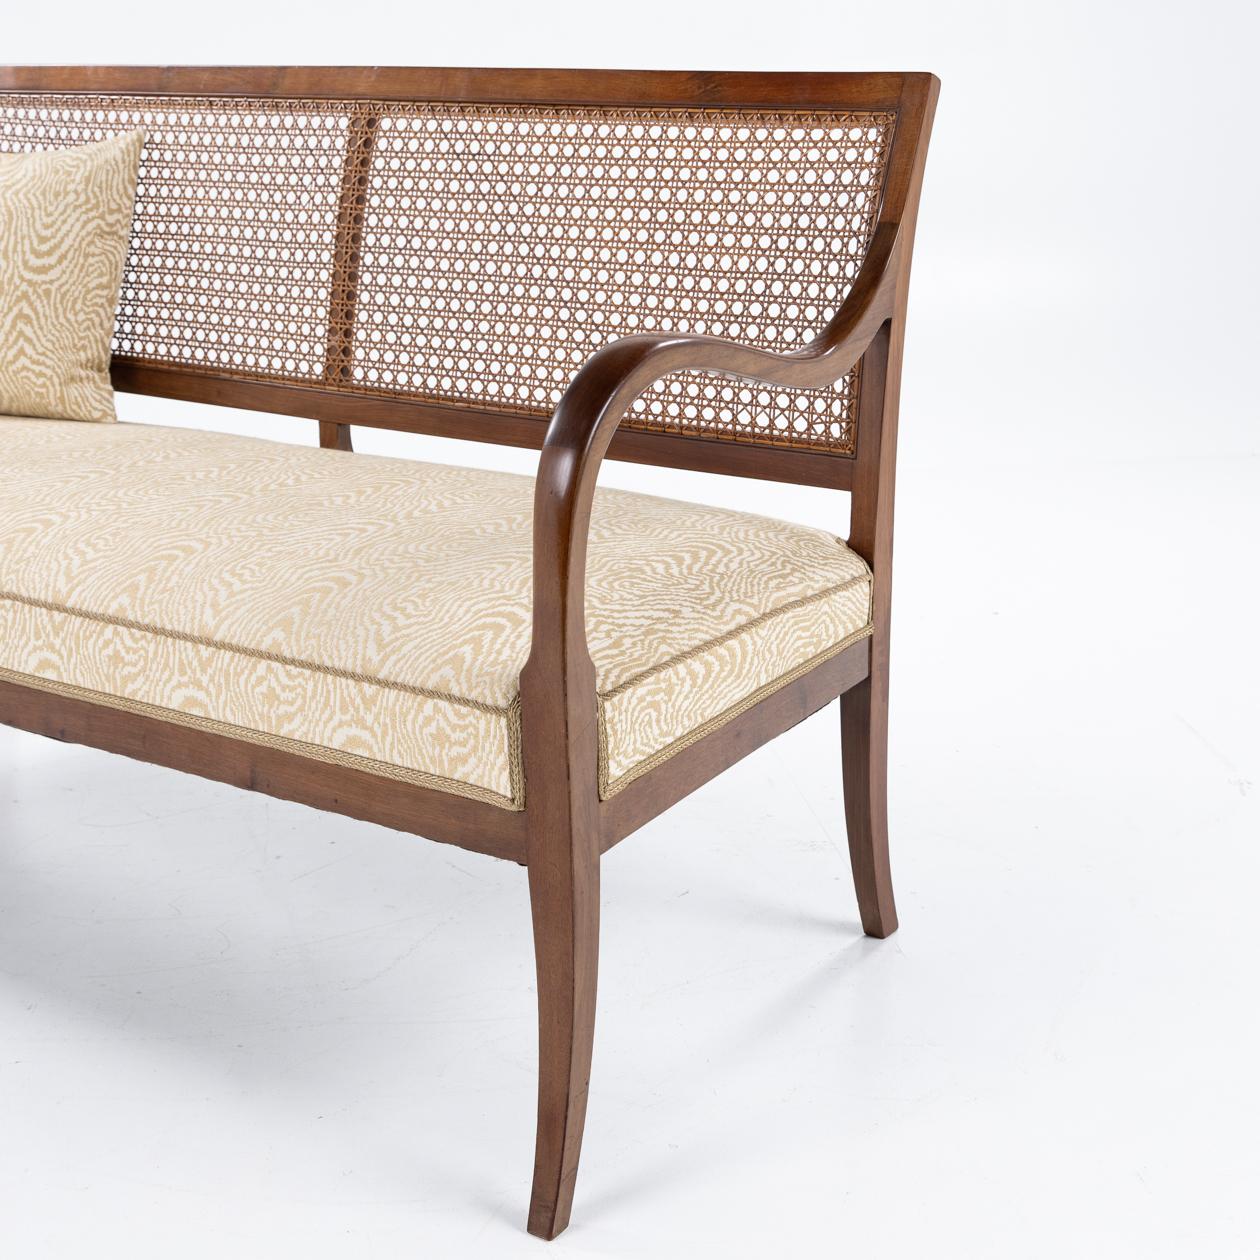 Danish Sofa with curved armrests by Frits Henningsen. Three matching chairs available For Sale